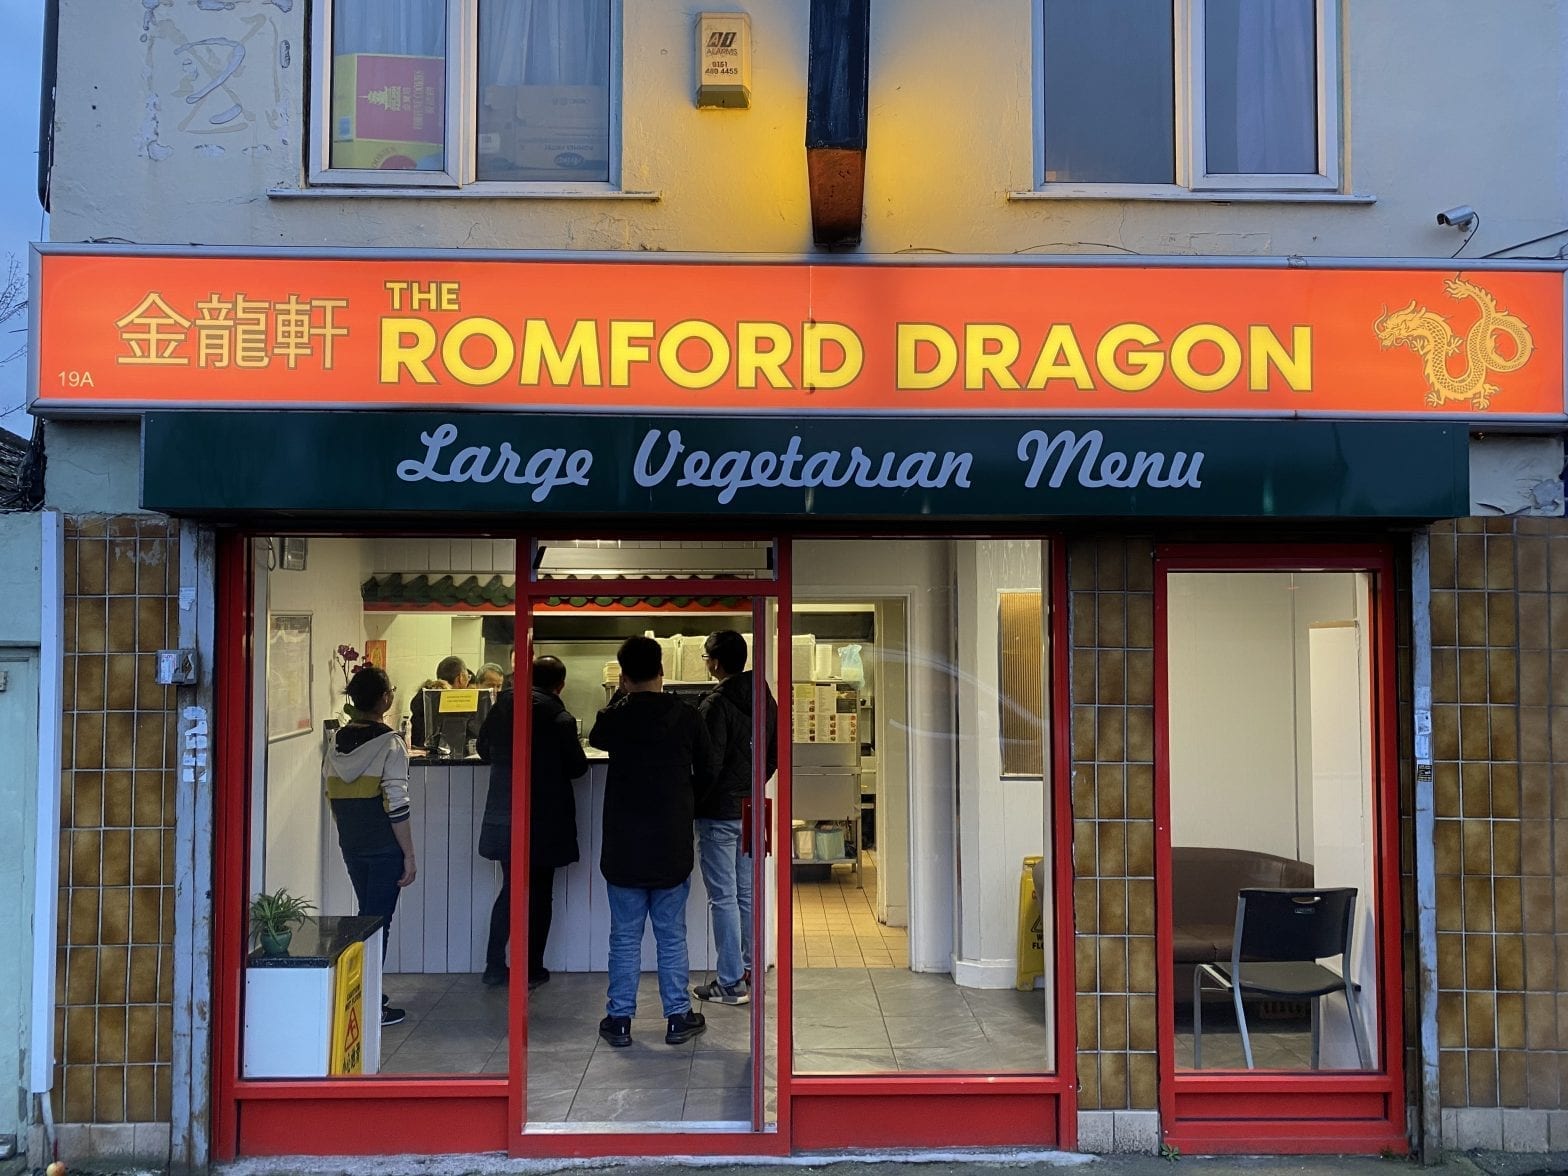 A shopfront with red doors and wide windows. The sign on top in red and gold states the name 'The Romford Dragon' with the address '19A The Parade, Colchester Road, Romford, RM3 0AQ' and finally the phone number '01708 3381818'. Inside the shop looks busy with a cue of people waiting as a woman behind the counter takes orders.